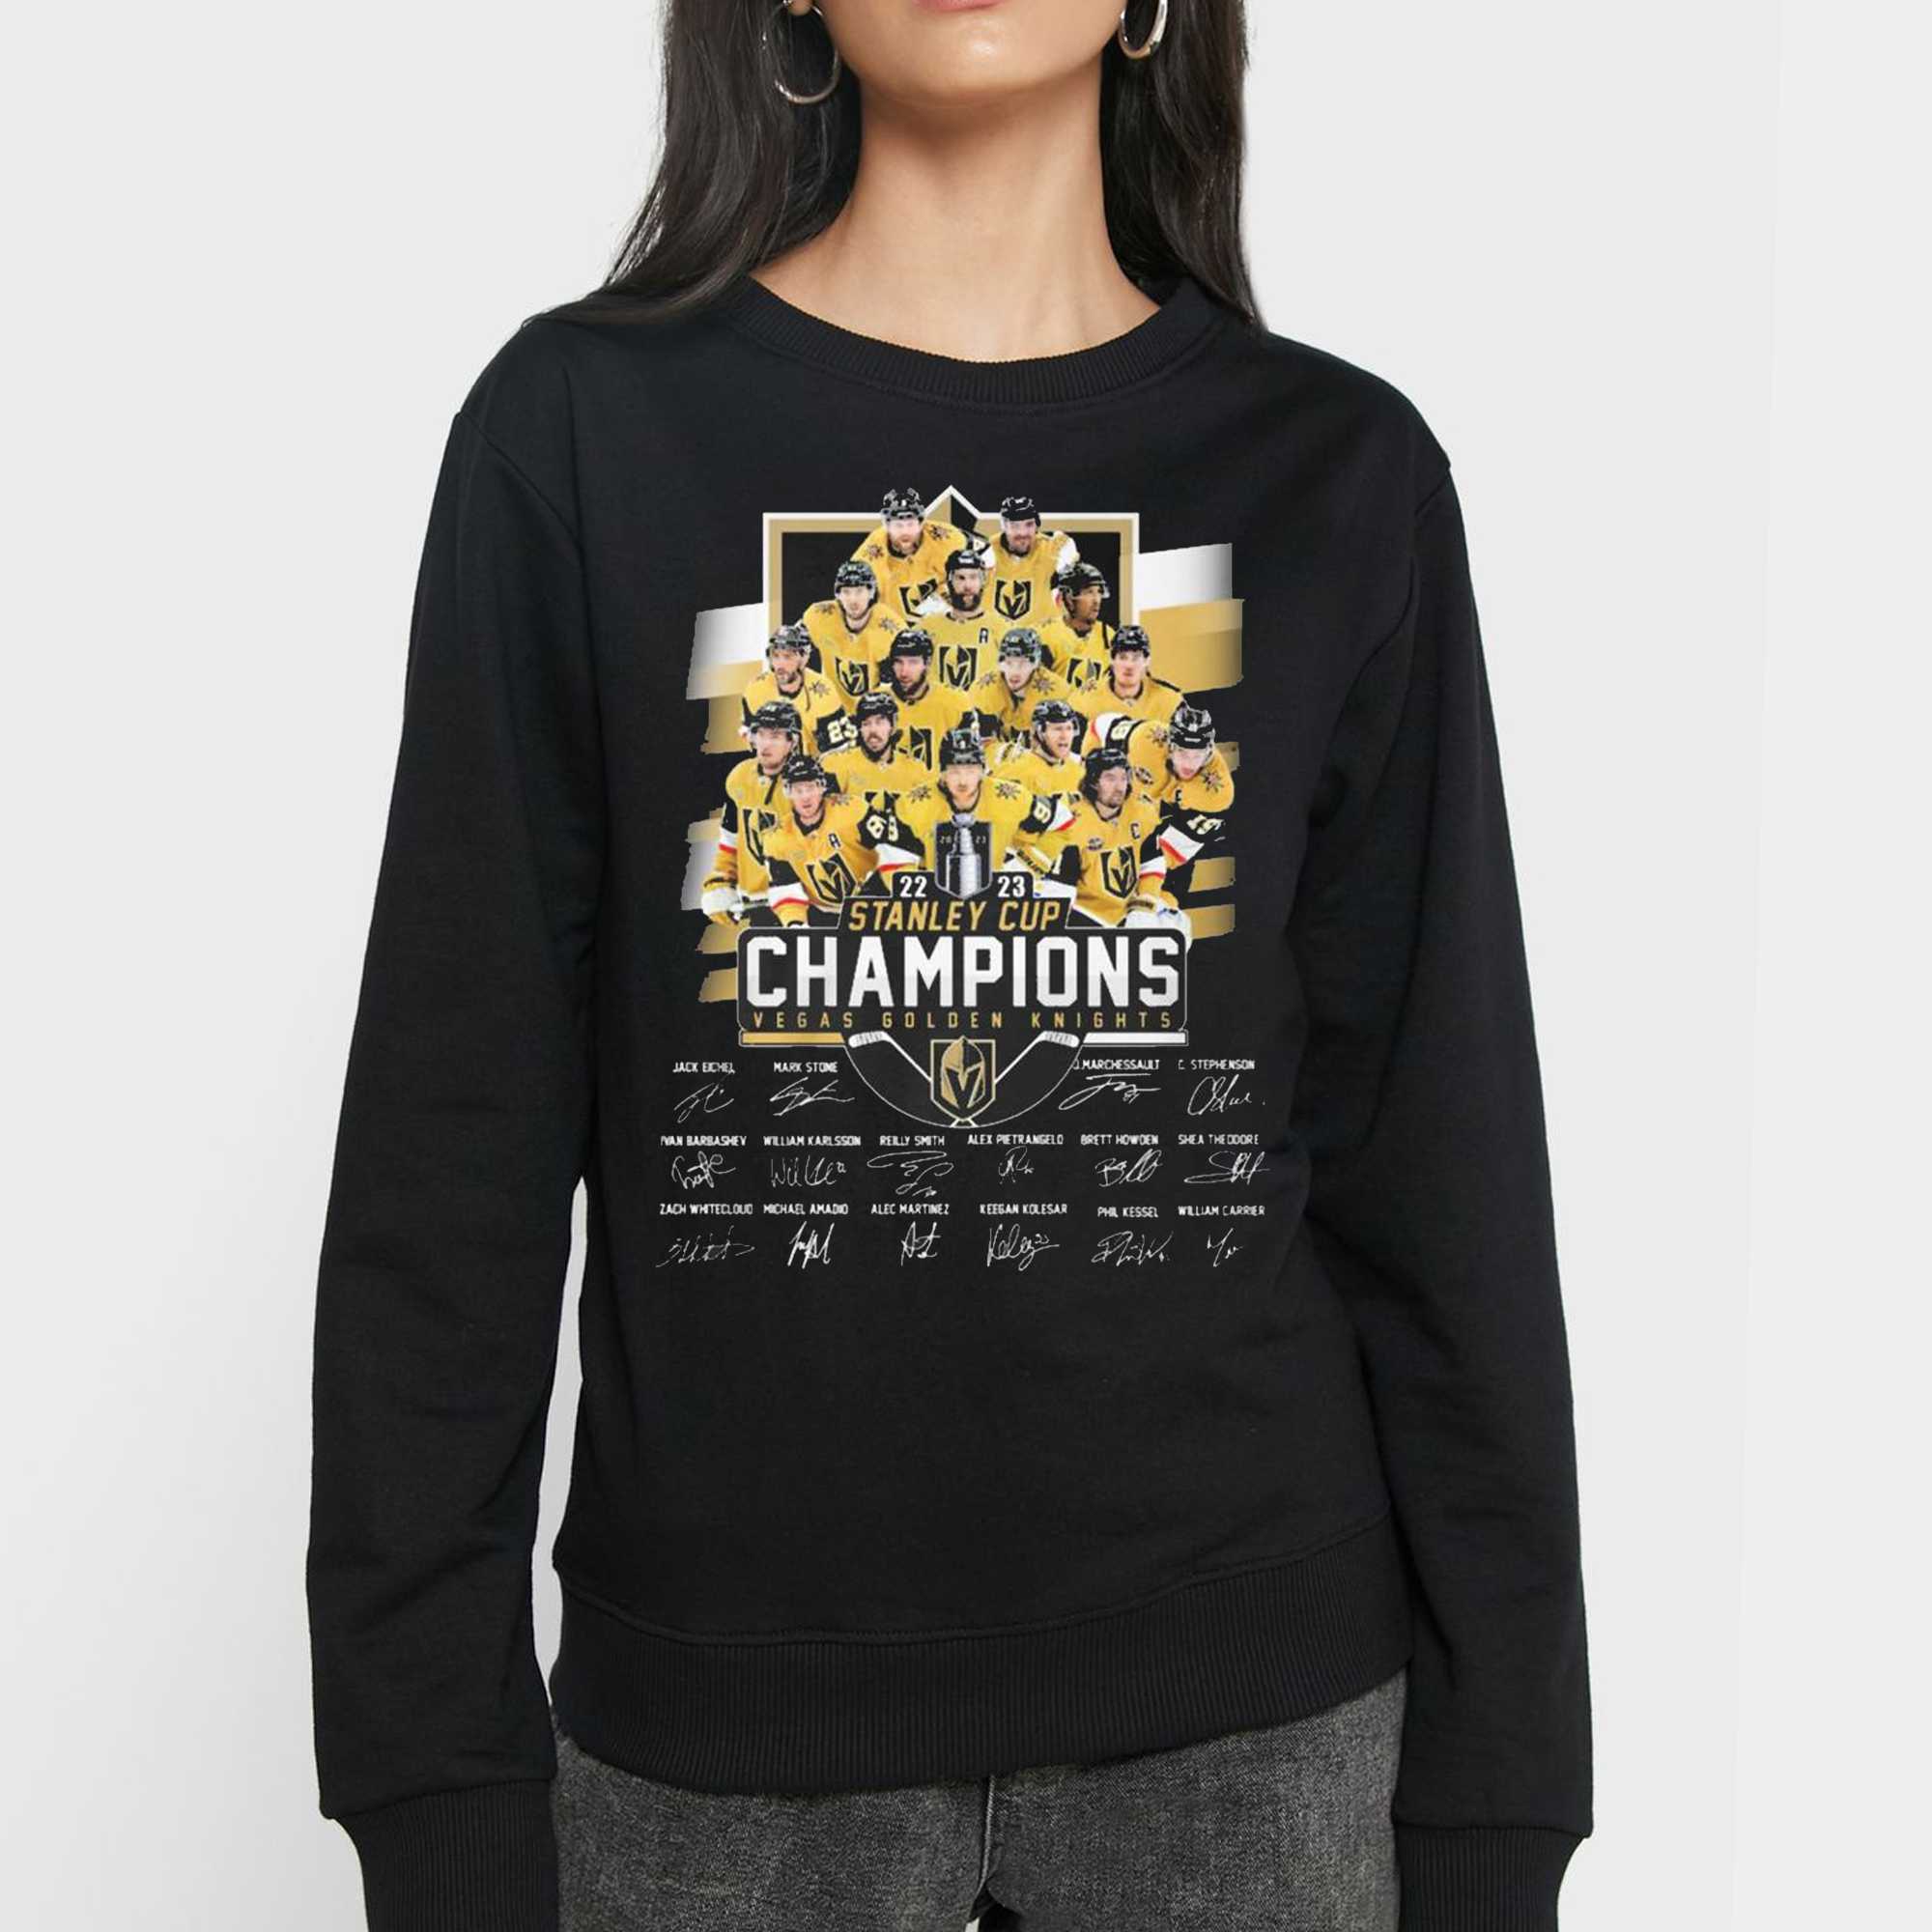 Vegas Golden Knights 2023 NHL champions shirts, hats on sale now: Where to  get more limited Stanley Cup championship fan gear 